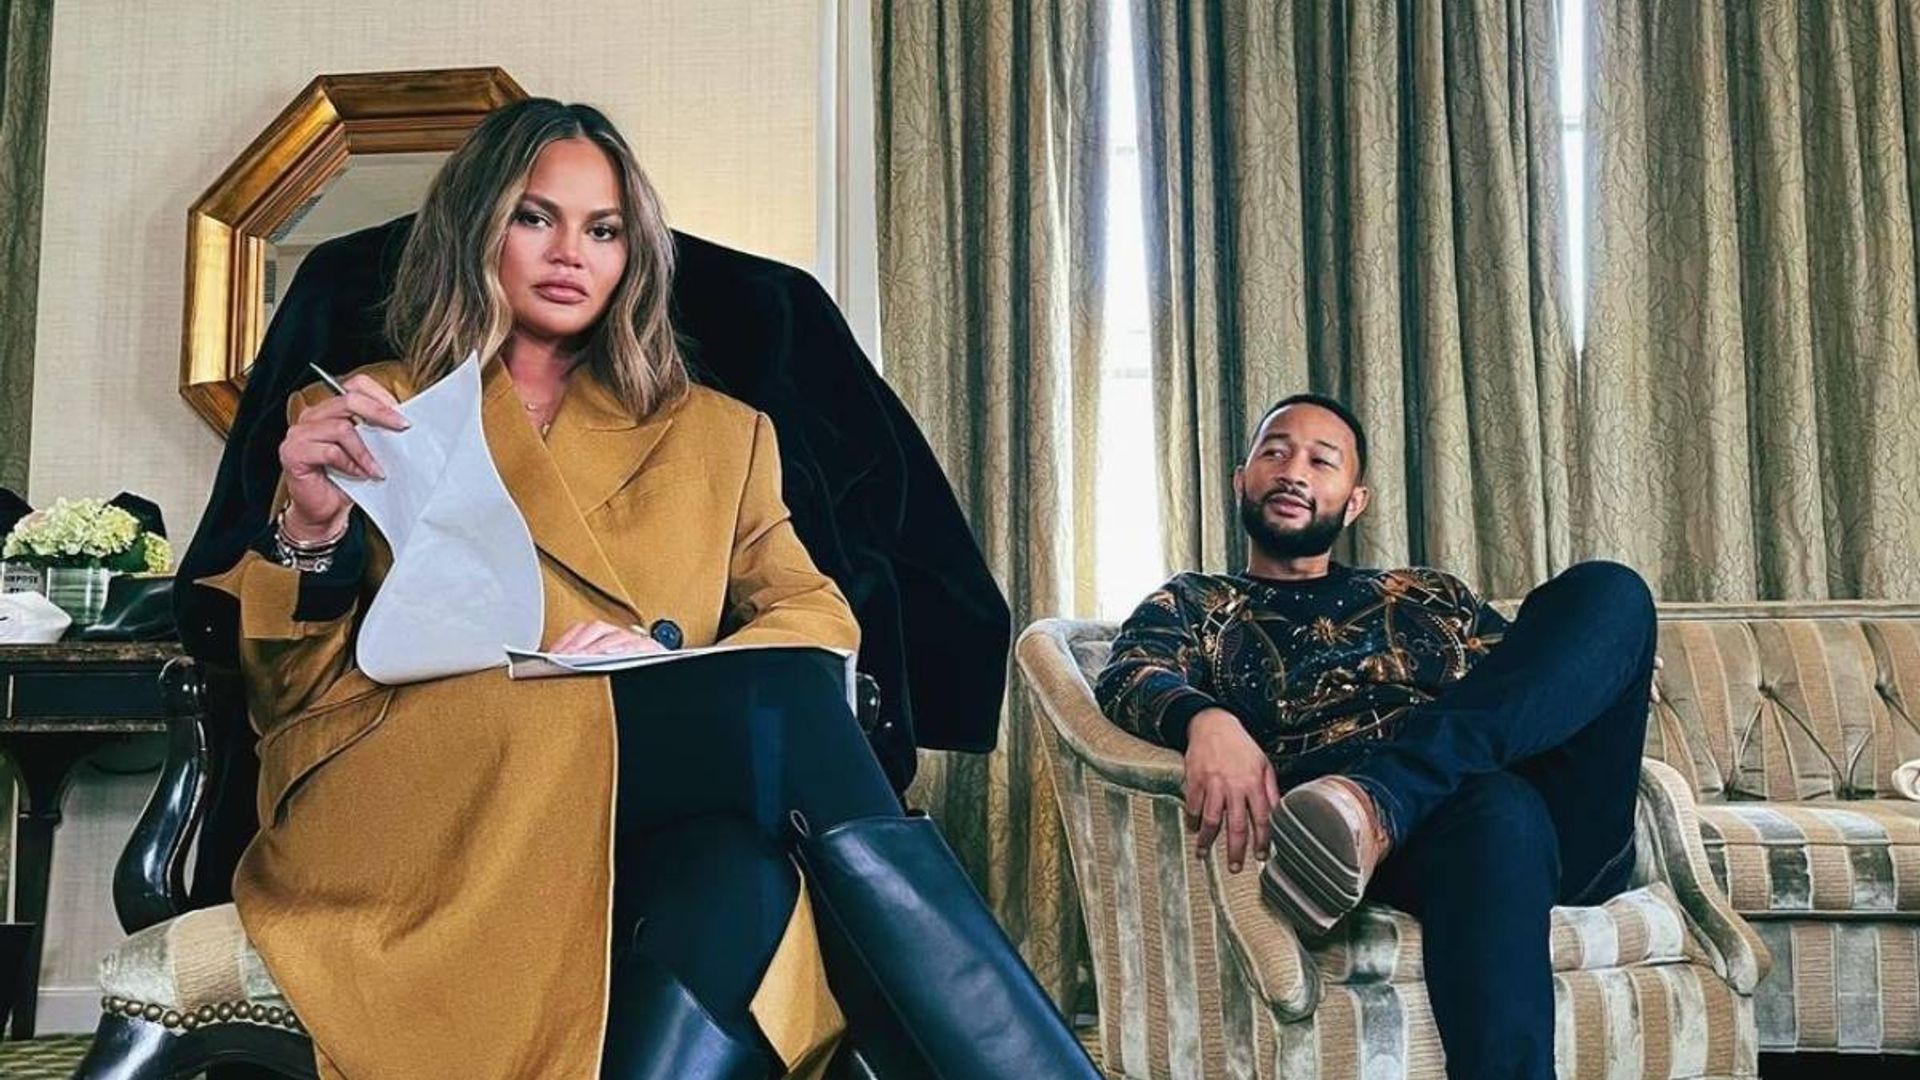 Chrissy Teigen made a stunning inauguration fashion statement you might have missed